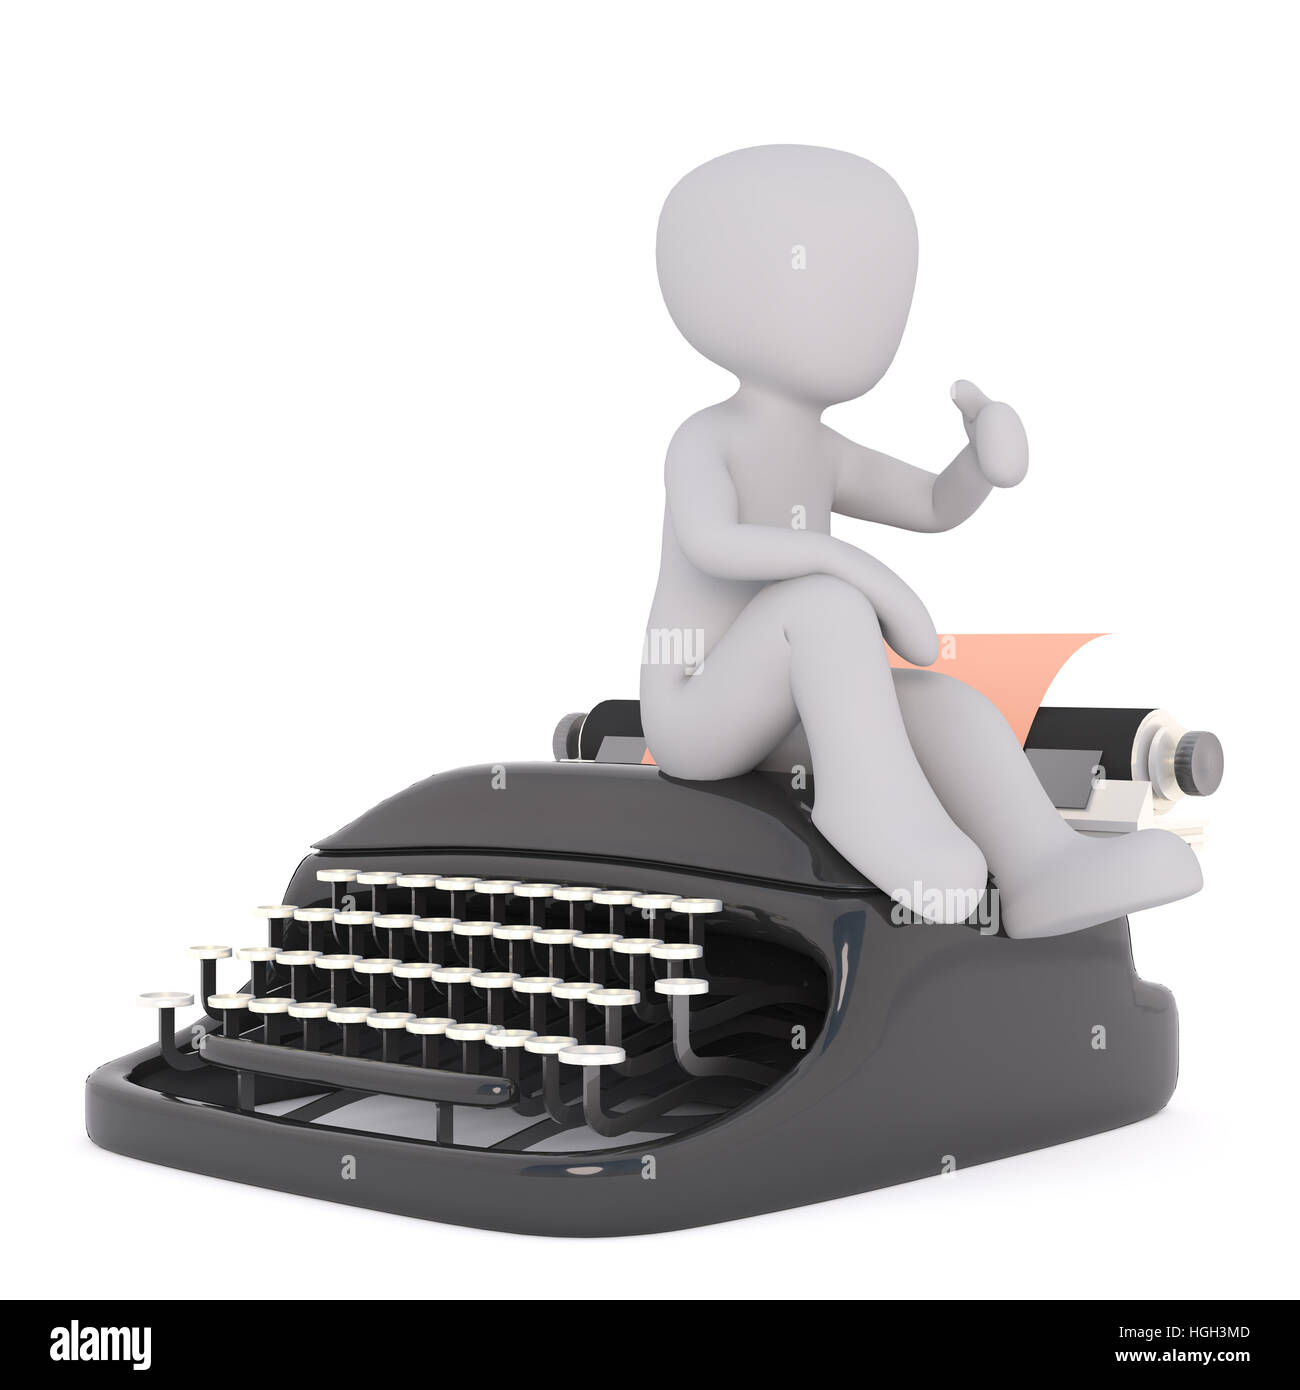 Little faceless cartoon man thumbs up while sitting on the vintage typewriter machine, 3D render isolated on white bacground Stock Photo